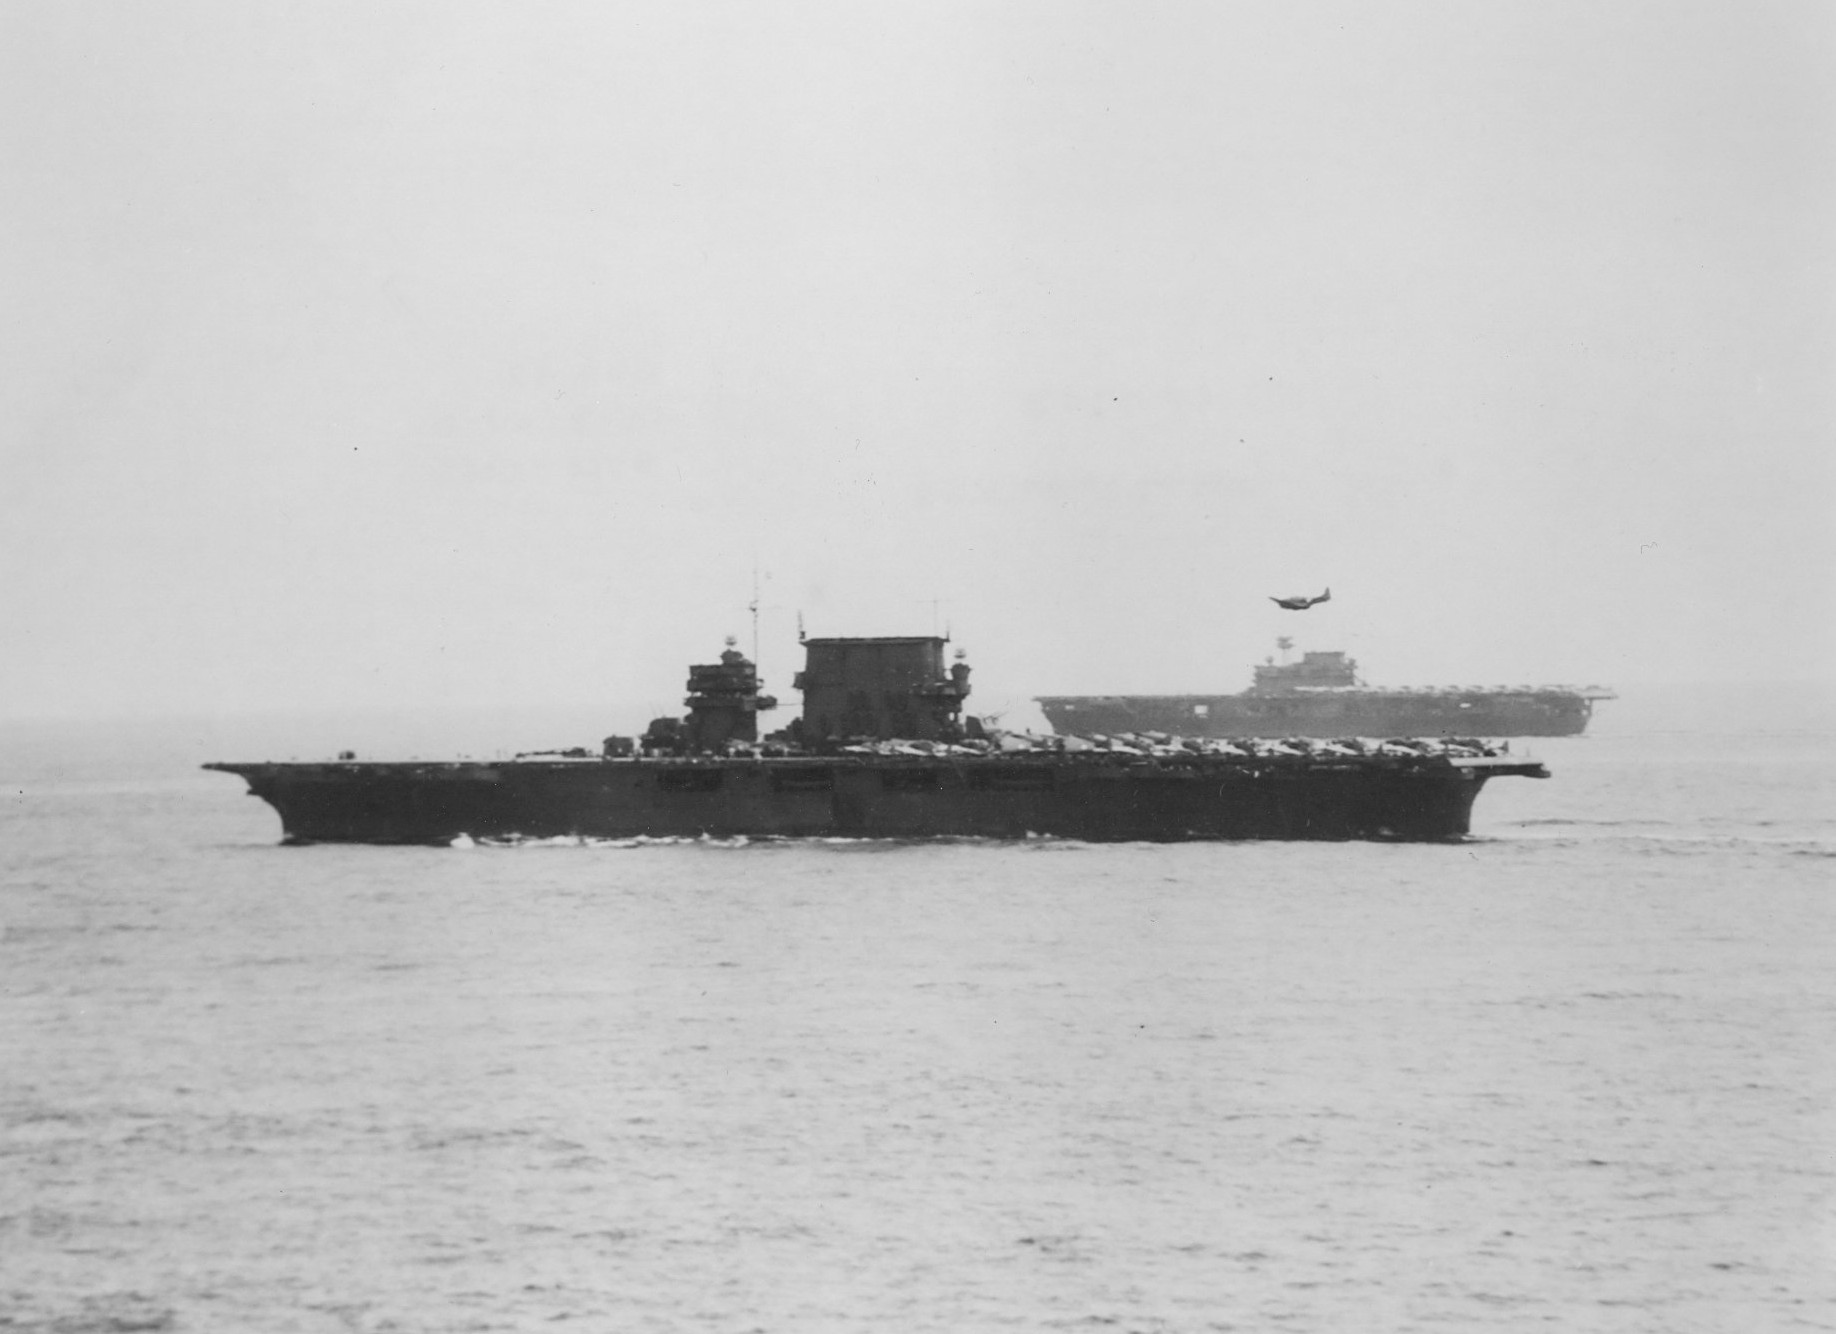 USS Saratoga (foreground) and USS Enterprise (background) underway in the Solomon Islands, Aug 1942